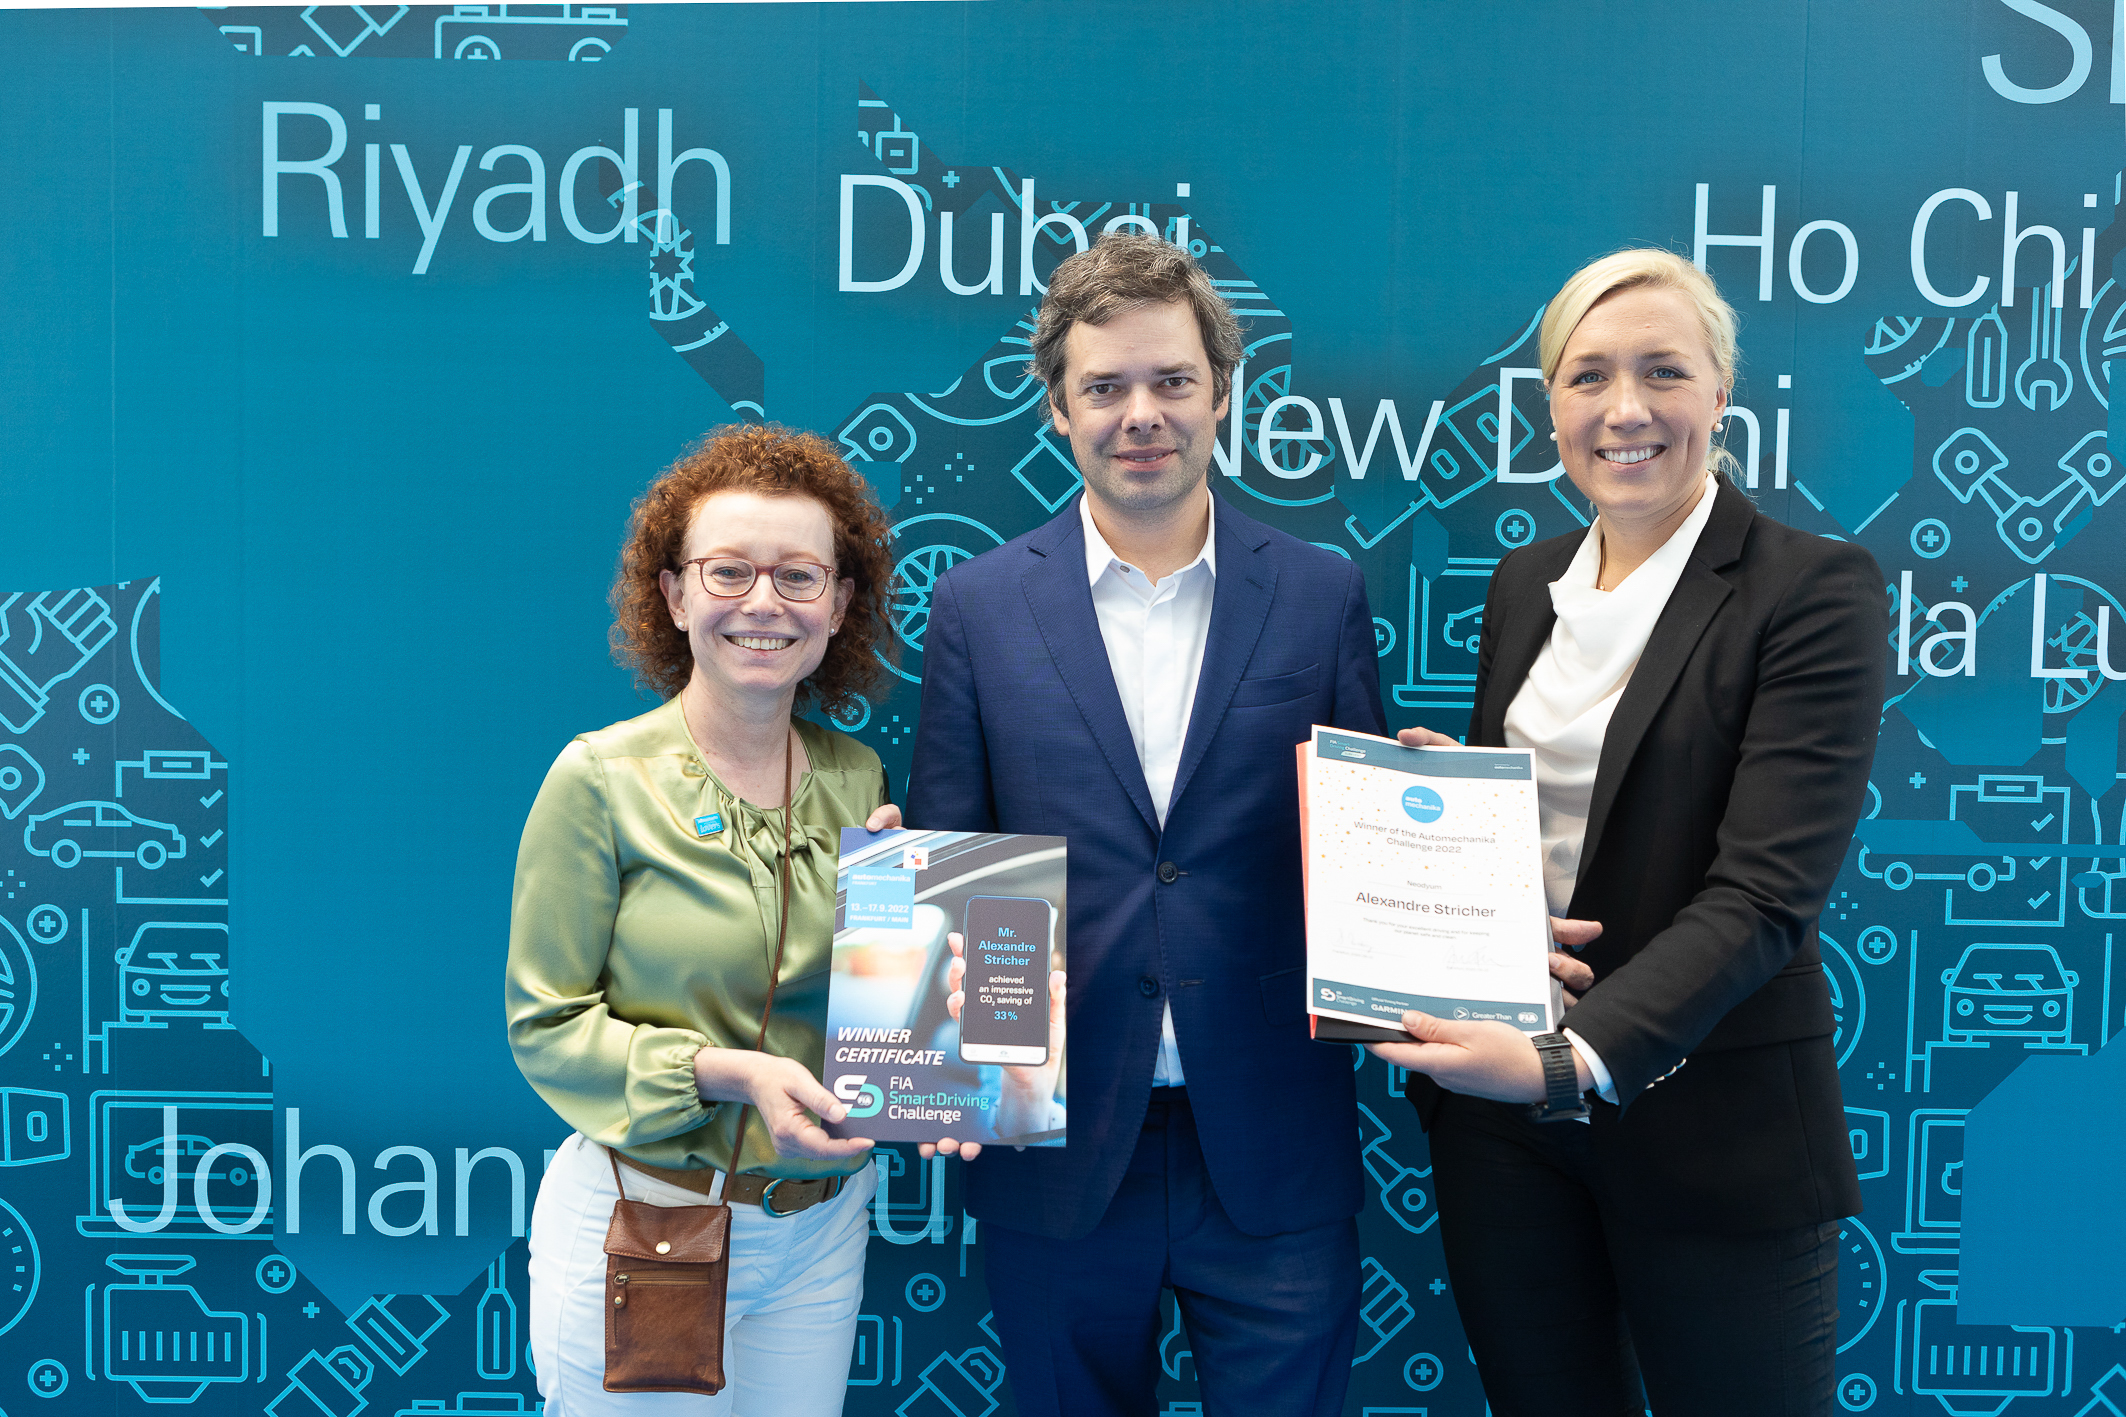 From left to right: Sarah Lindsey (Director Business Development  Mobility & Logistics, Messe Frankfurt Exhibition GmbH), Alexandre Stricher (winning driver), Johanna Forseke (Chief Business Officer, Greater Than)